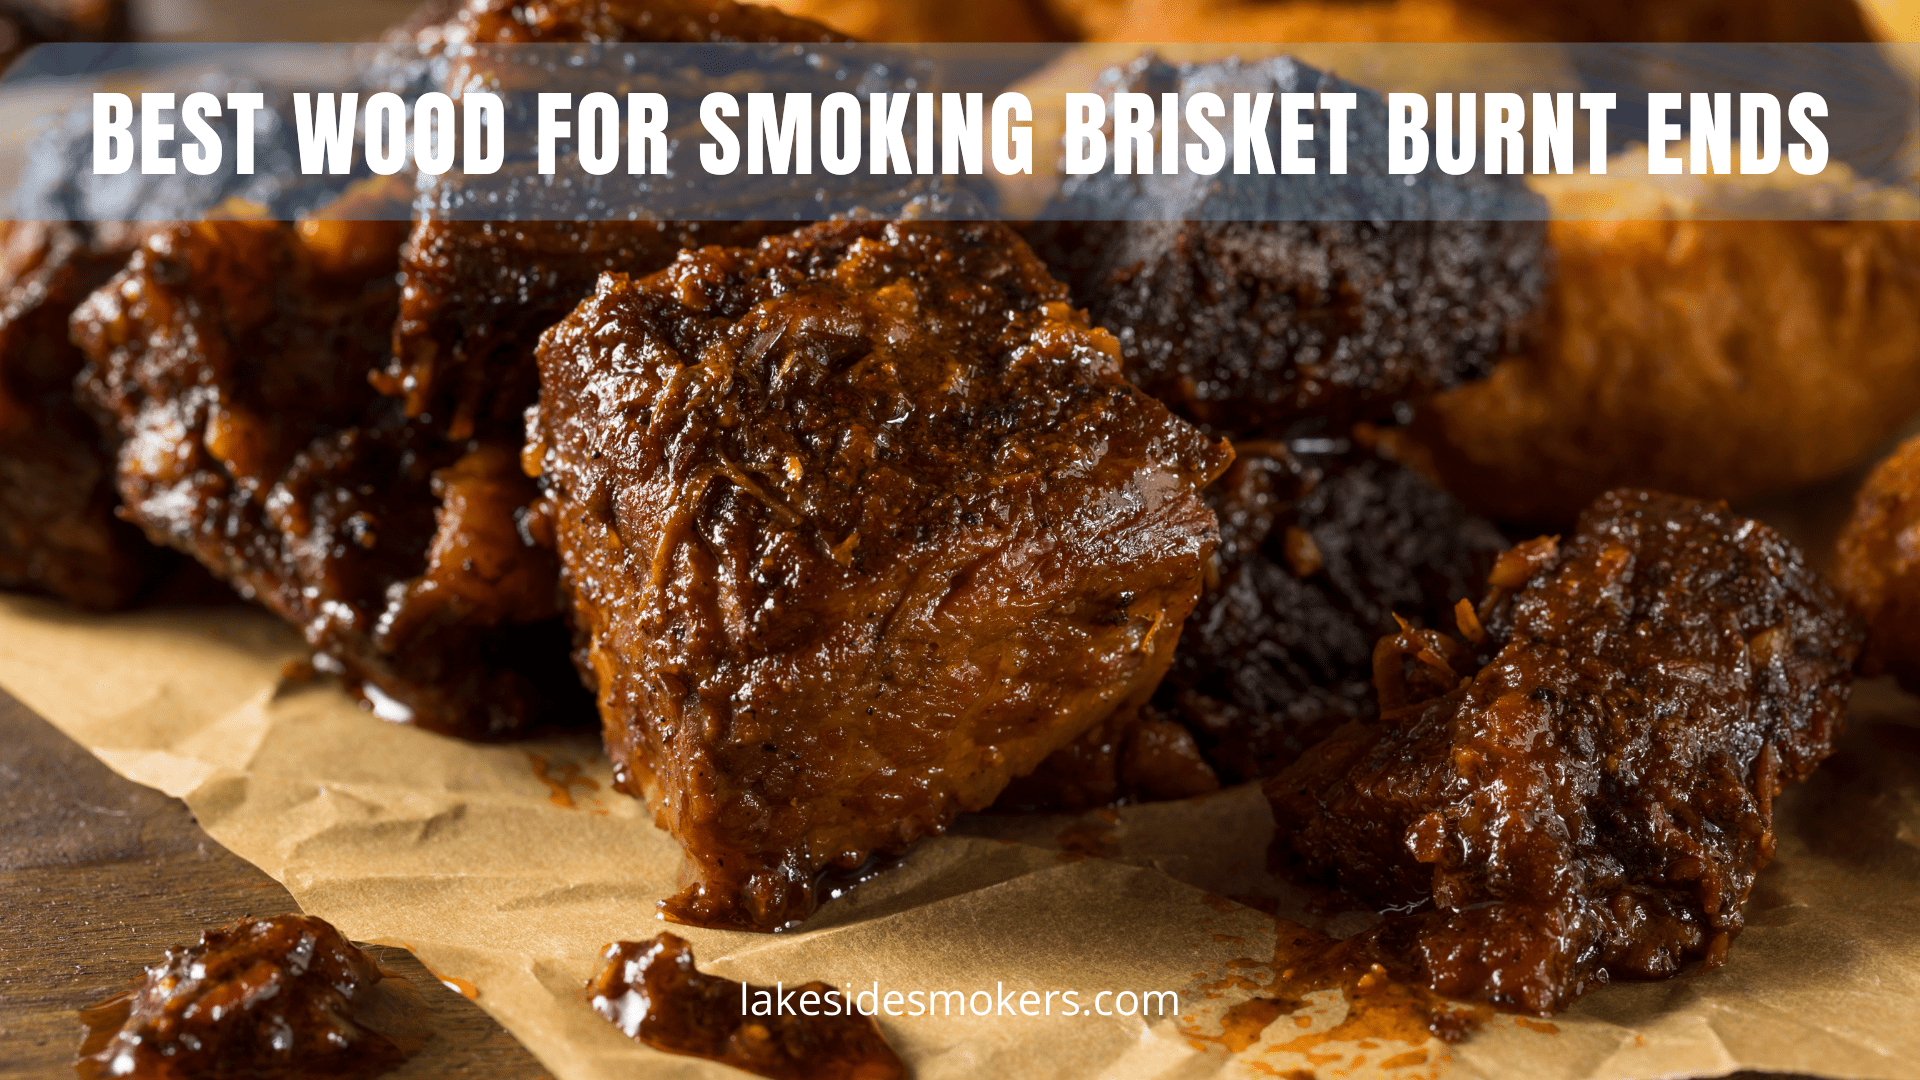 Best wood for smoking brisket burnt ends | Go for strong and smokey